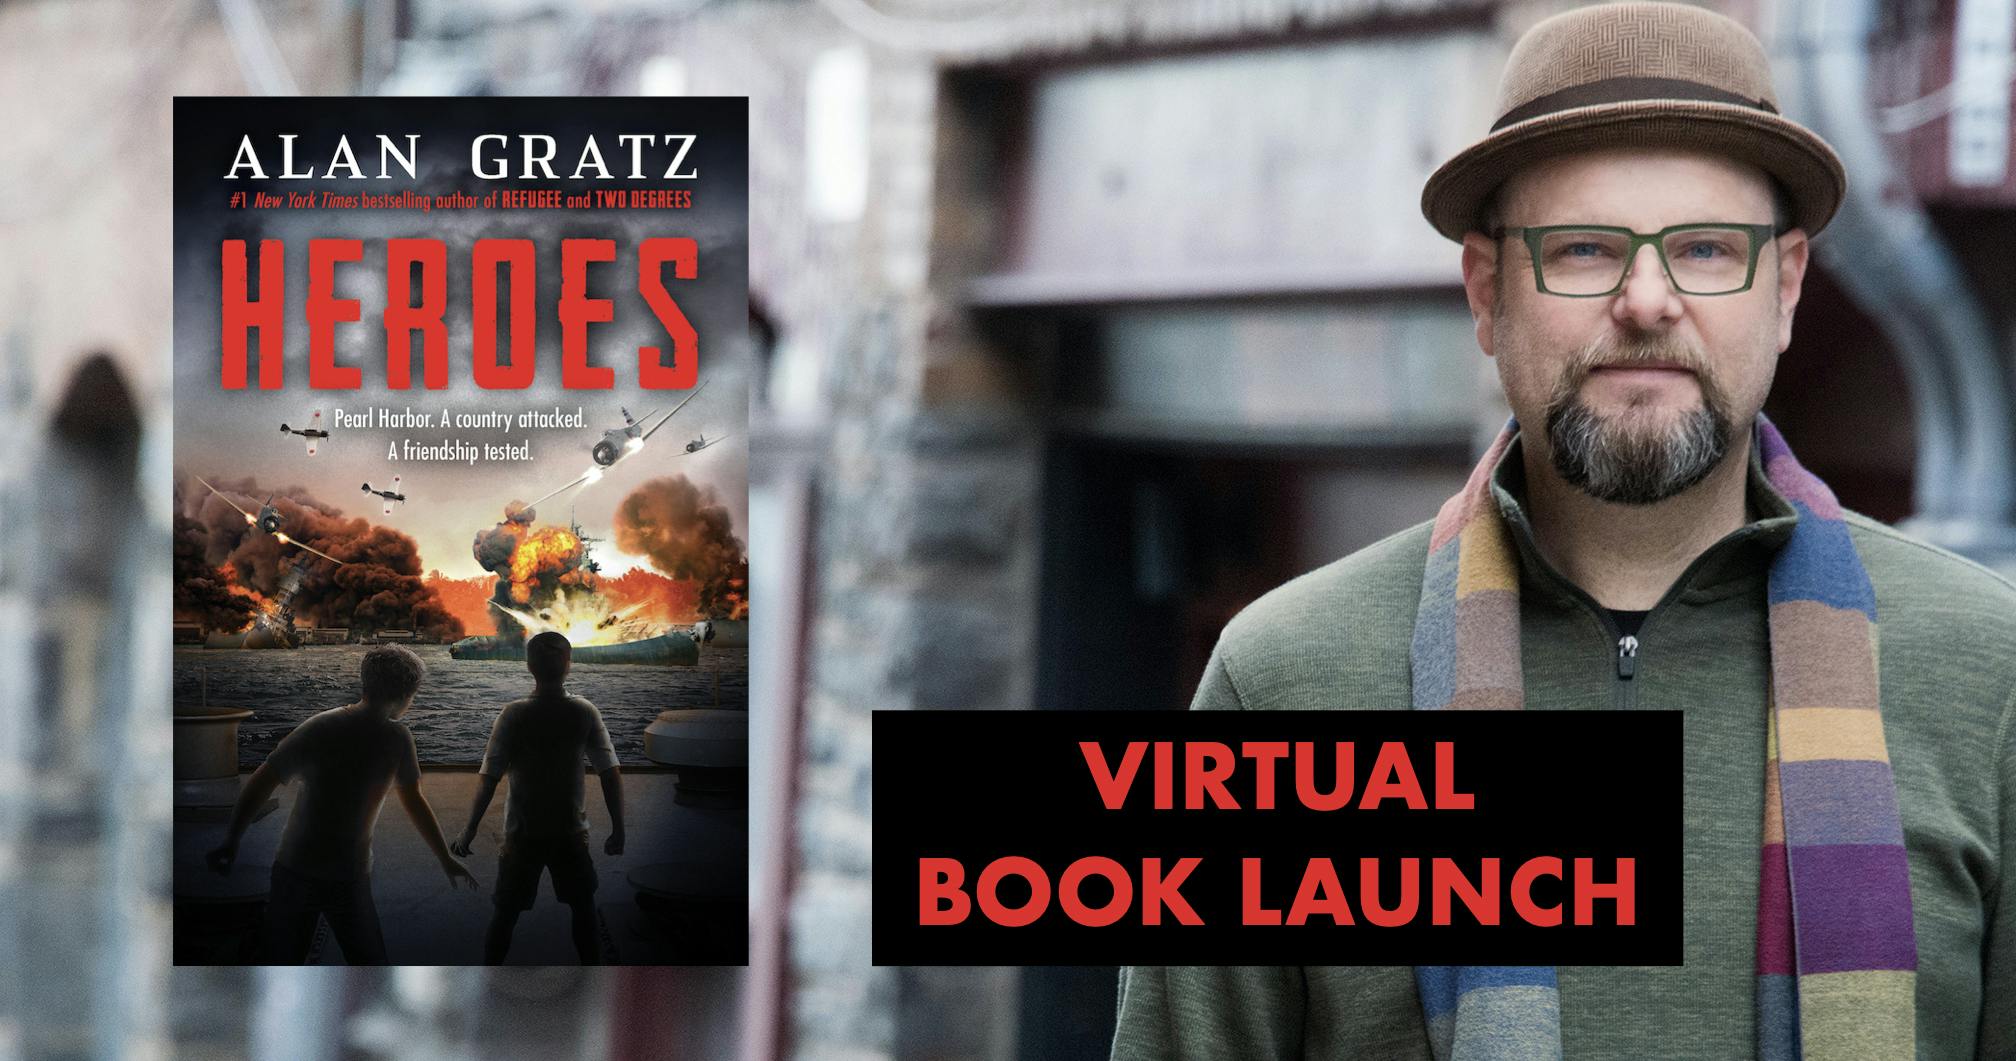 HEROES Virtual Book Launch! event cover photo